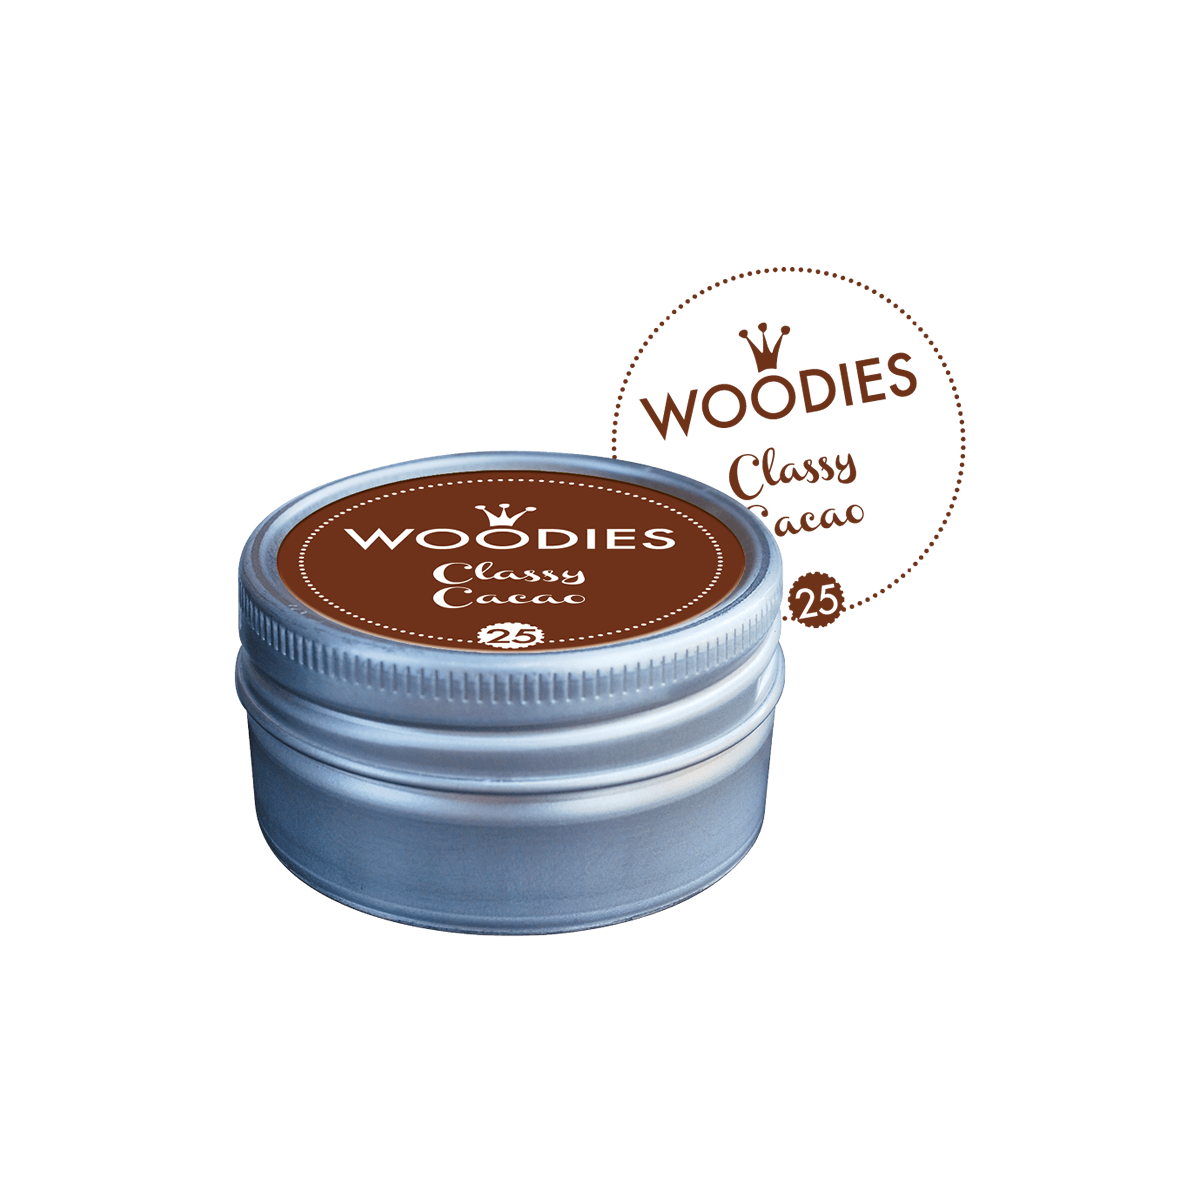 COLOP Arts & Crafts Woodies Ταμπόν Σφραγίδας Classy Cacao